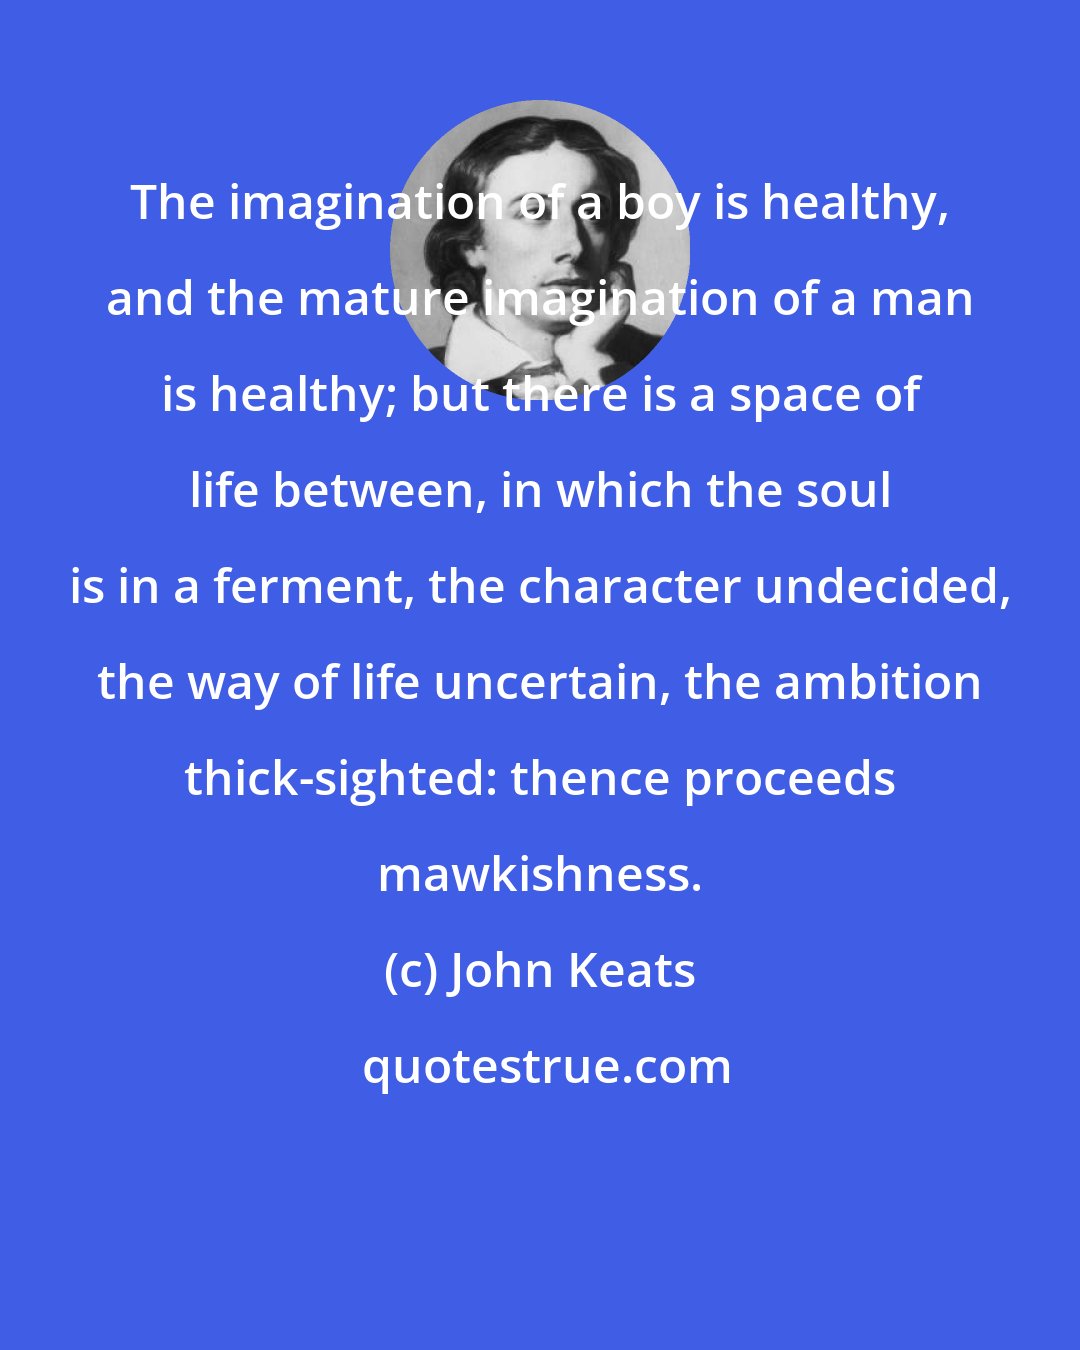 John Keats: The imagination of a boy is healthy, and the mature imagination of a man is healthy; but there is a space of life between, in which the soul is in a ferment, the character undecided, the way of life uncertain, the ambition thick-sighted: thence proceeds mawkishness.